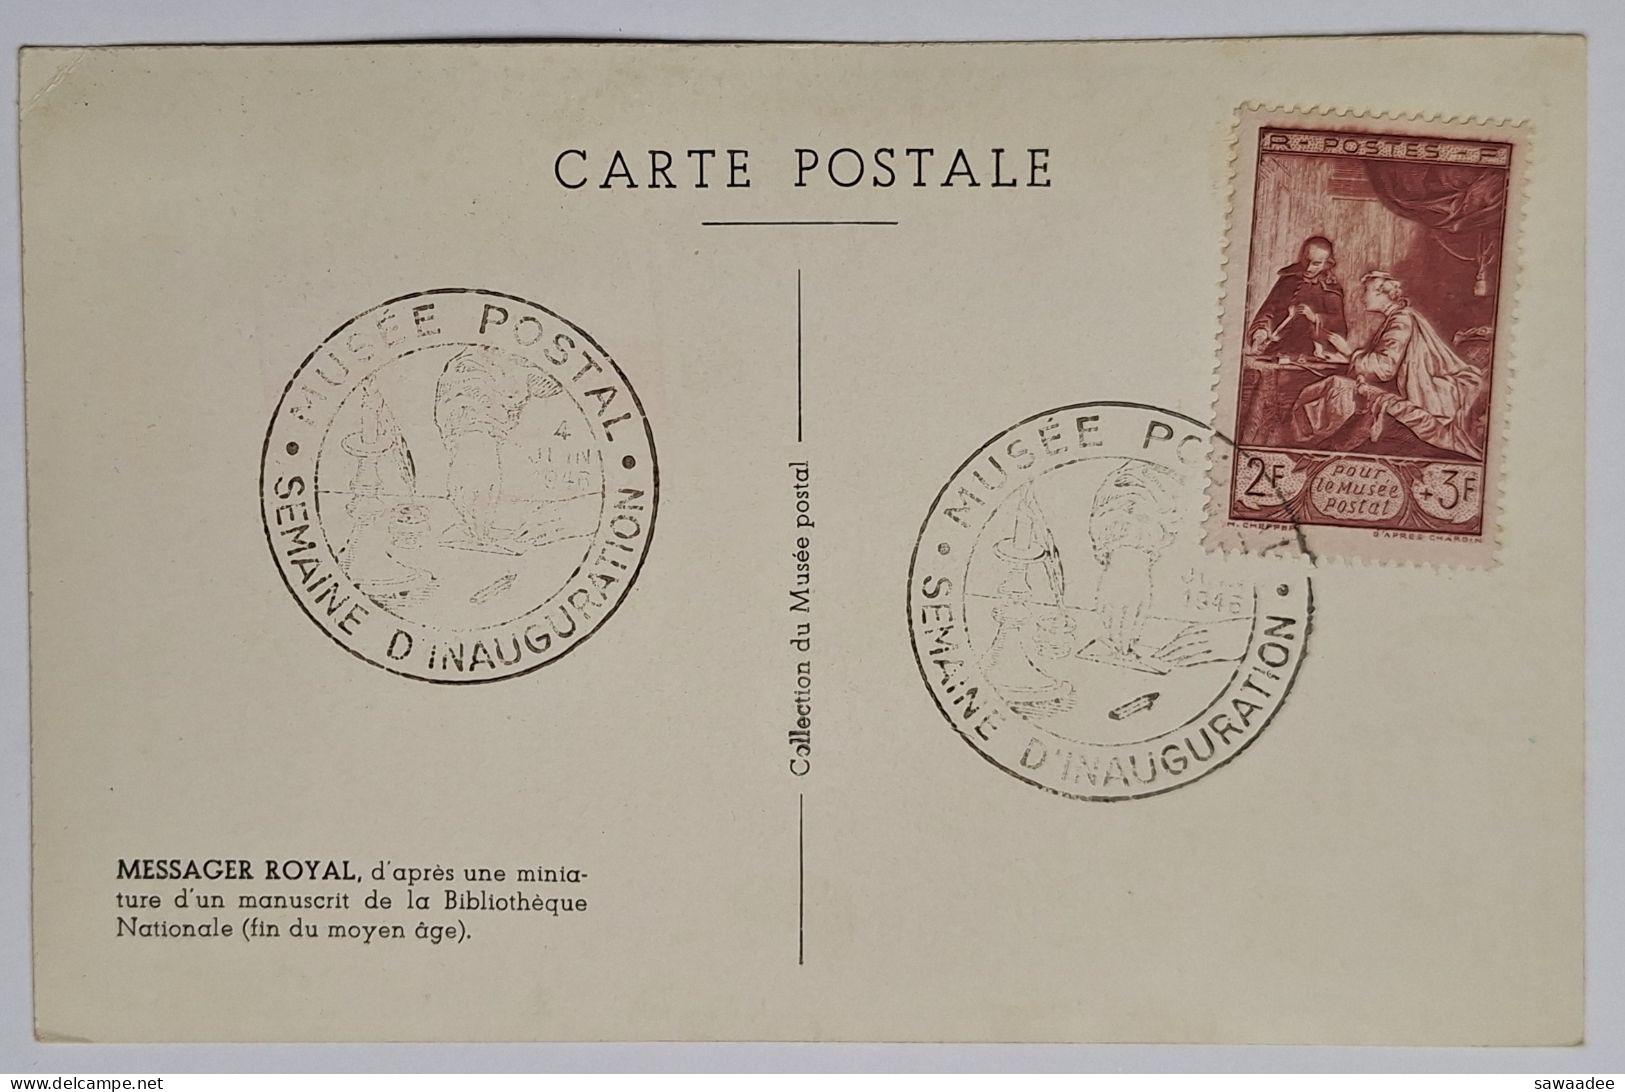 CARTE POSTALE FRANCE - MUSEE POSTAL - SEMAINE D'INAUGURATION - MESSAGER ROYAL - Poste & Postini